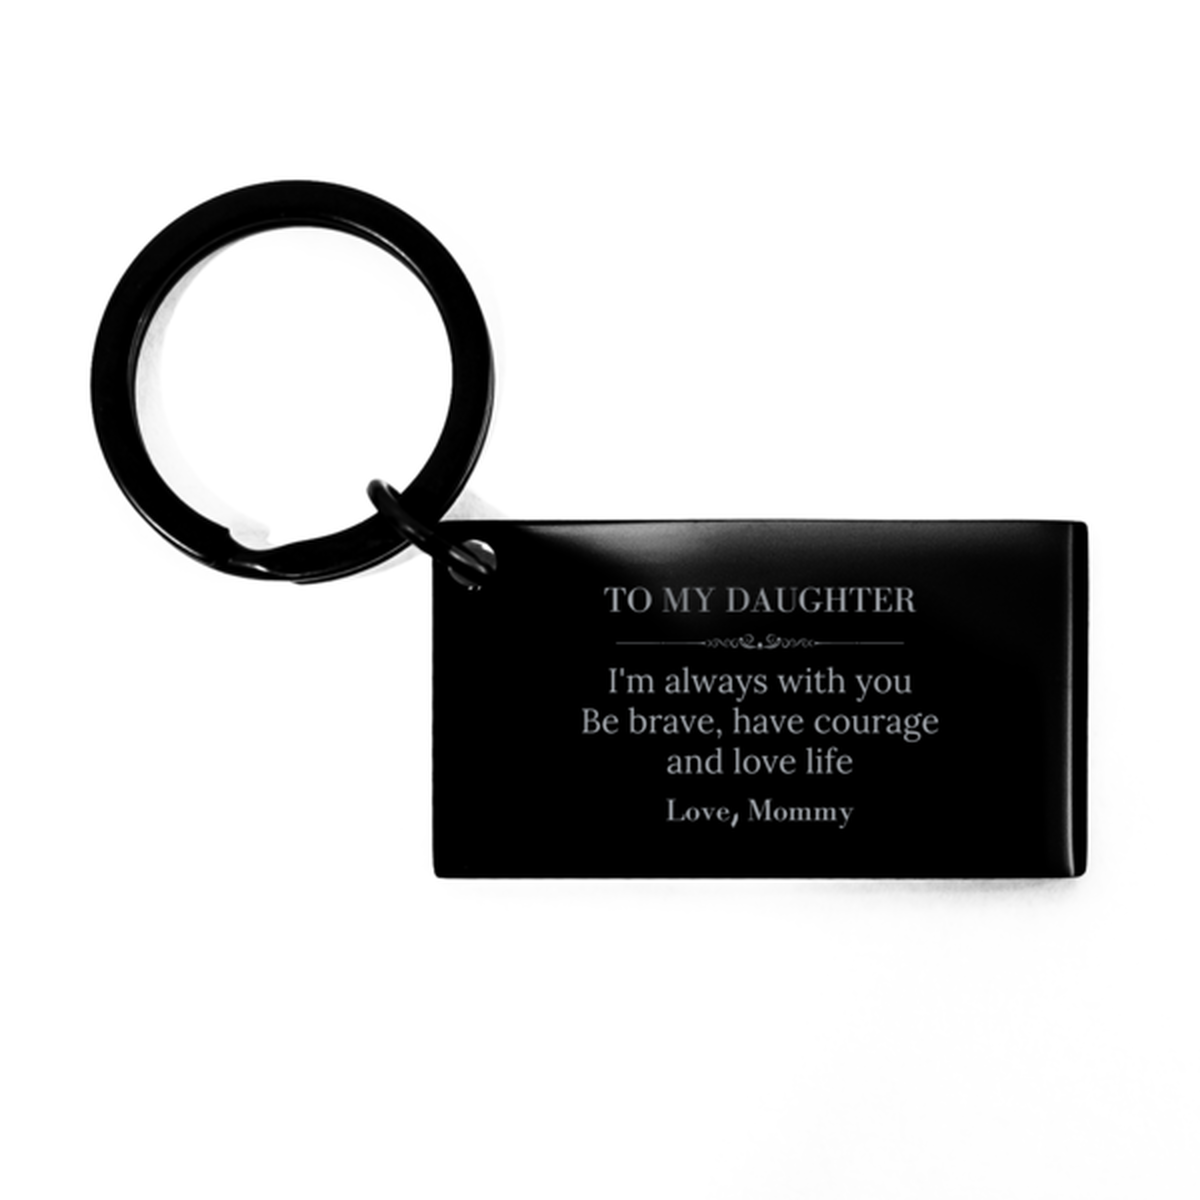 To My Daughter Gifts from Mommy, Unique Keychain Inspirational Christmas Birthday Graduation Gifts for Daughter I'm always with you. Be brave, have courage and love life. Love, Mommy